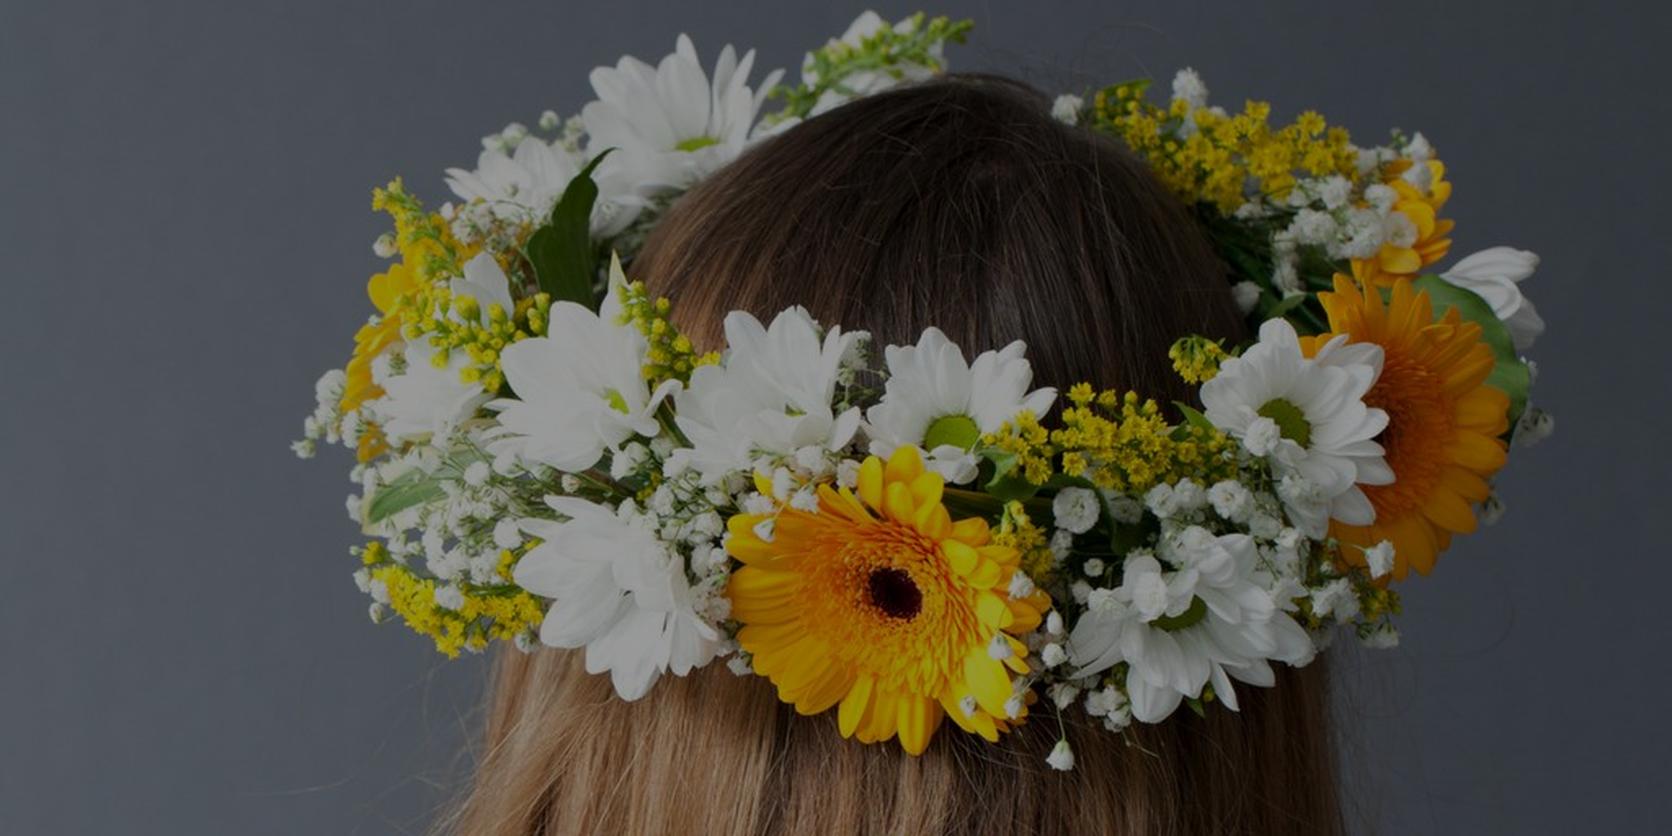 floral-crown-yellow-white-on-head